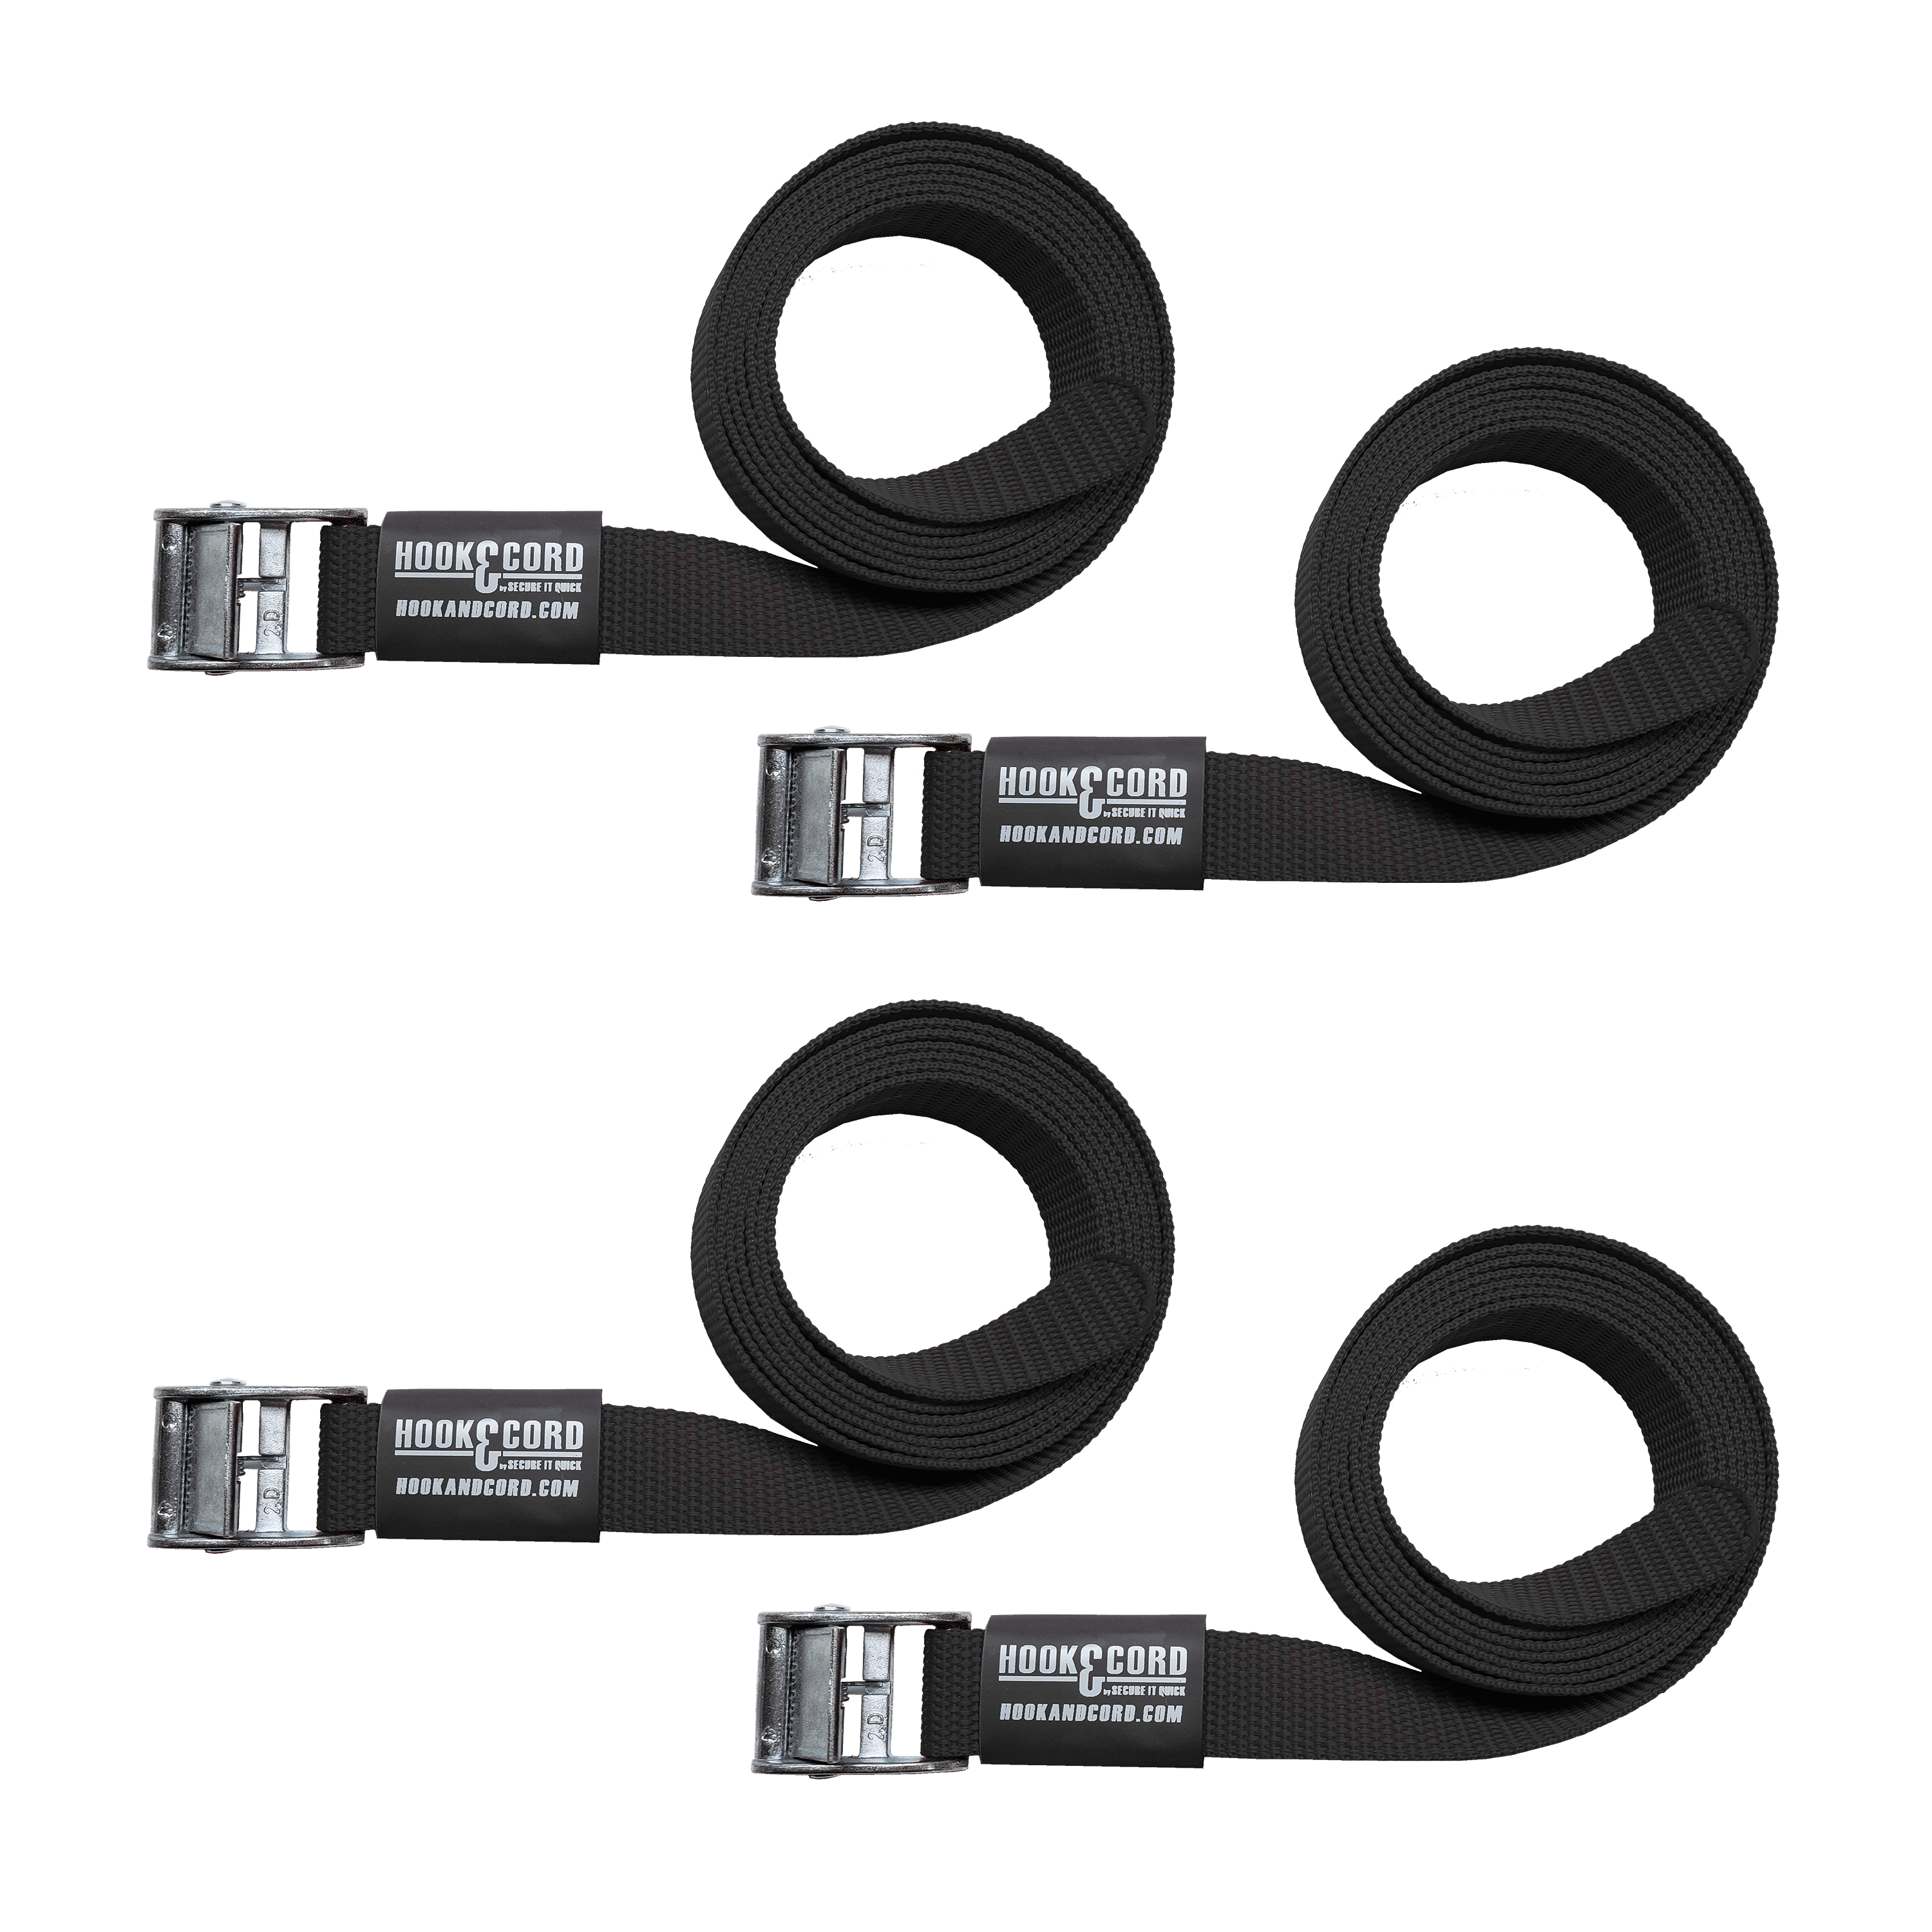 Premium Cinch Straps with Stainless Steel Metal Ring (Buckle), Reusable  Durable Hook and Loop, Multipurpose Securing Straps 1 x 12 - 8 Pack Plus  2